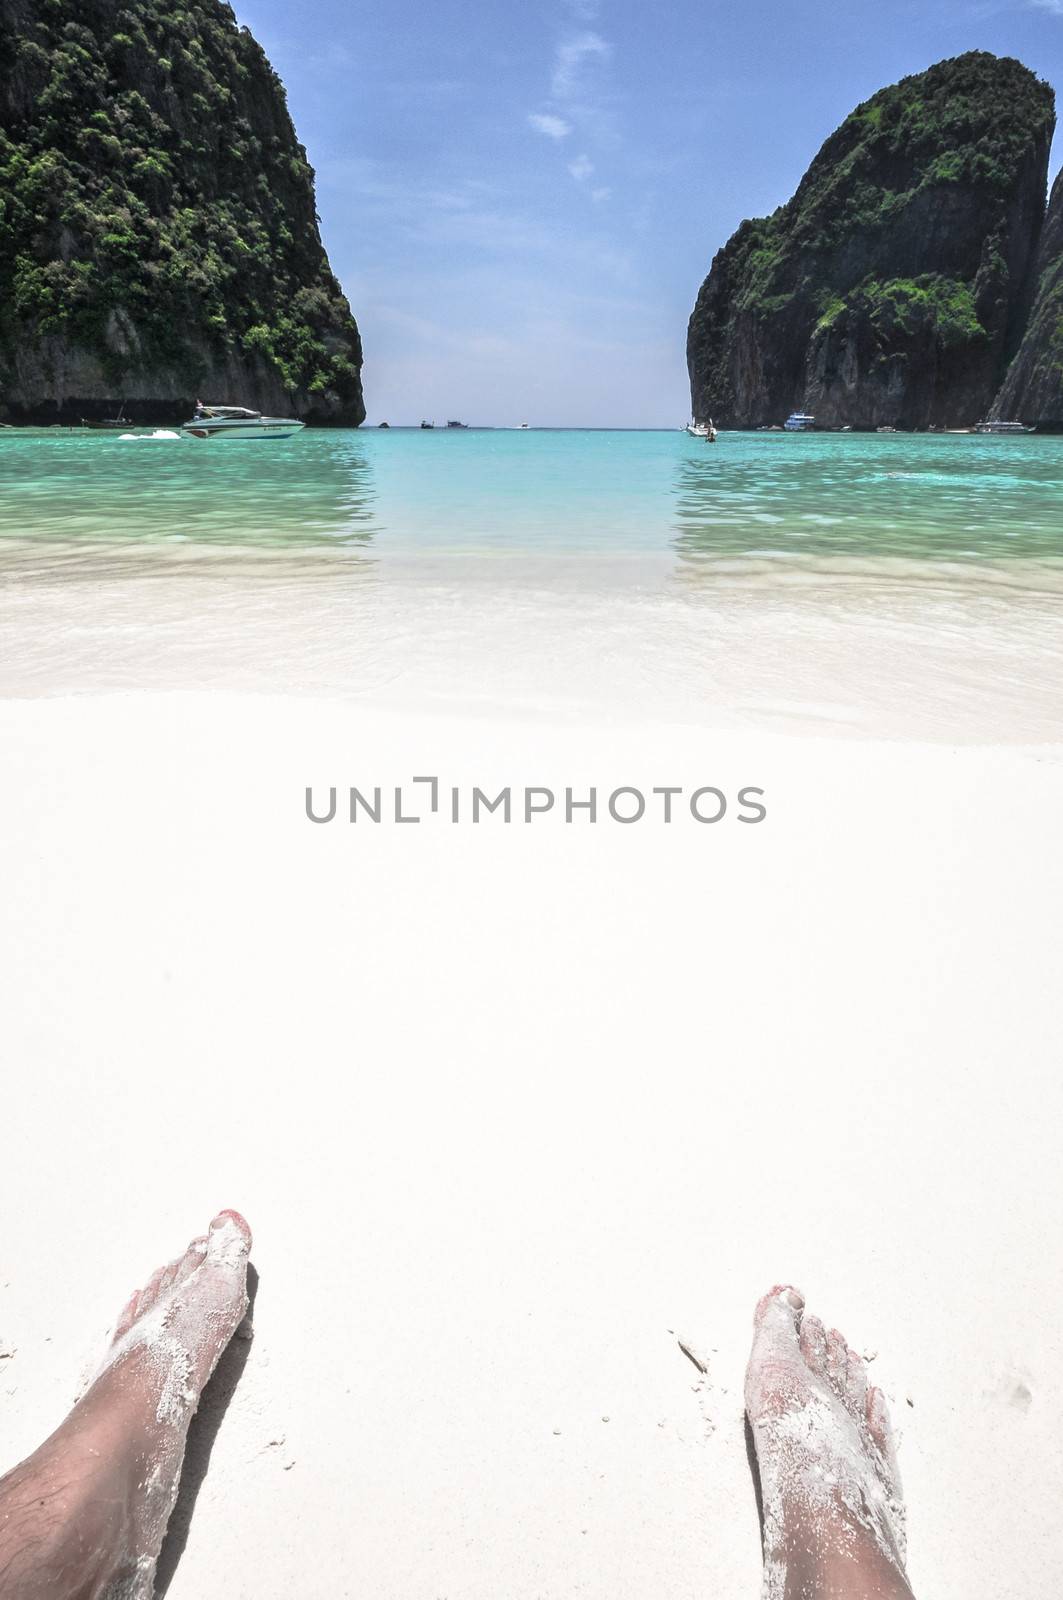 Feeds on Beach View of Maya Bay, Phi Phi island, Thailand Perfect tropical bay, Asia.